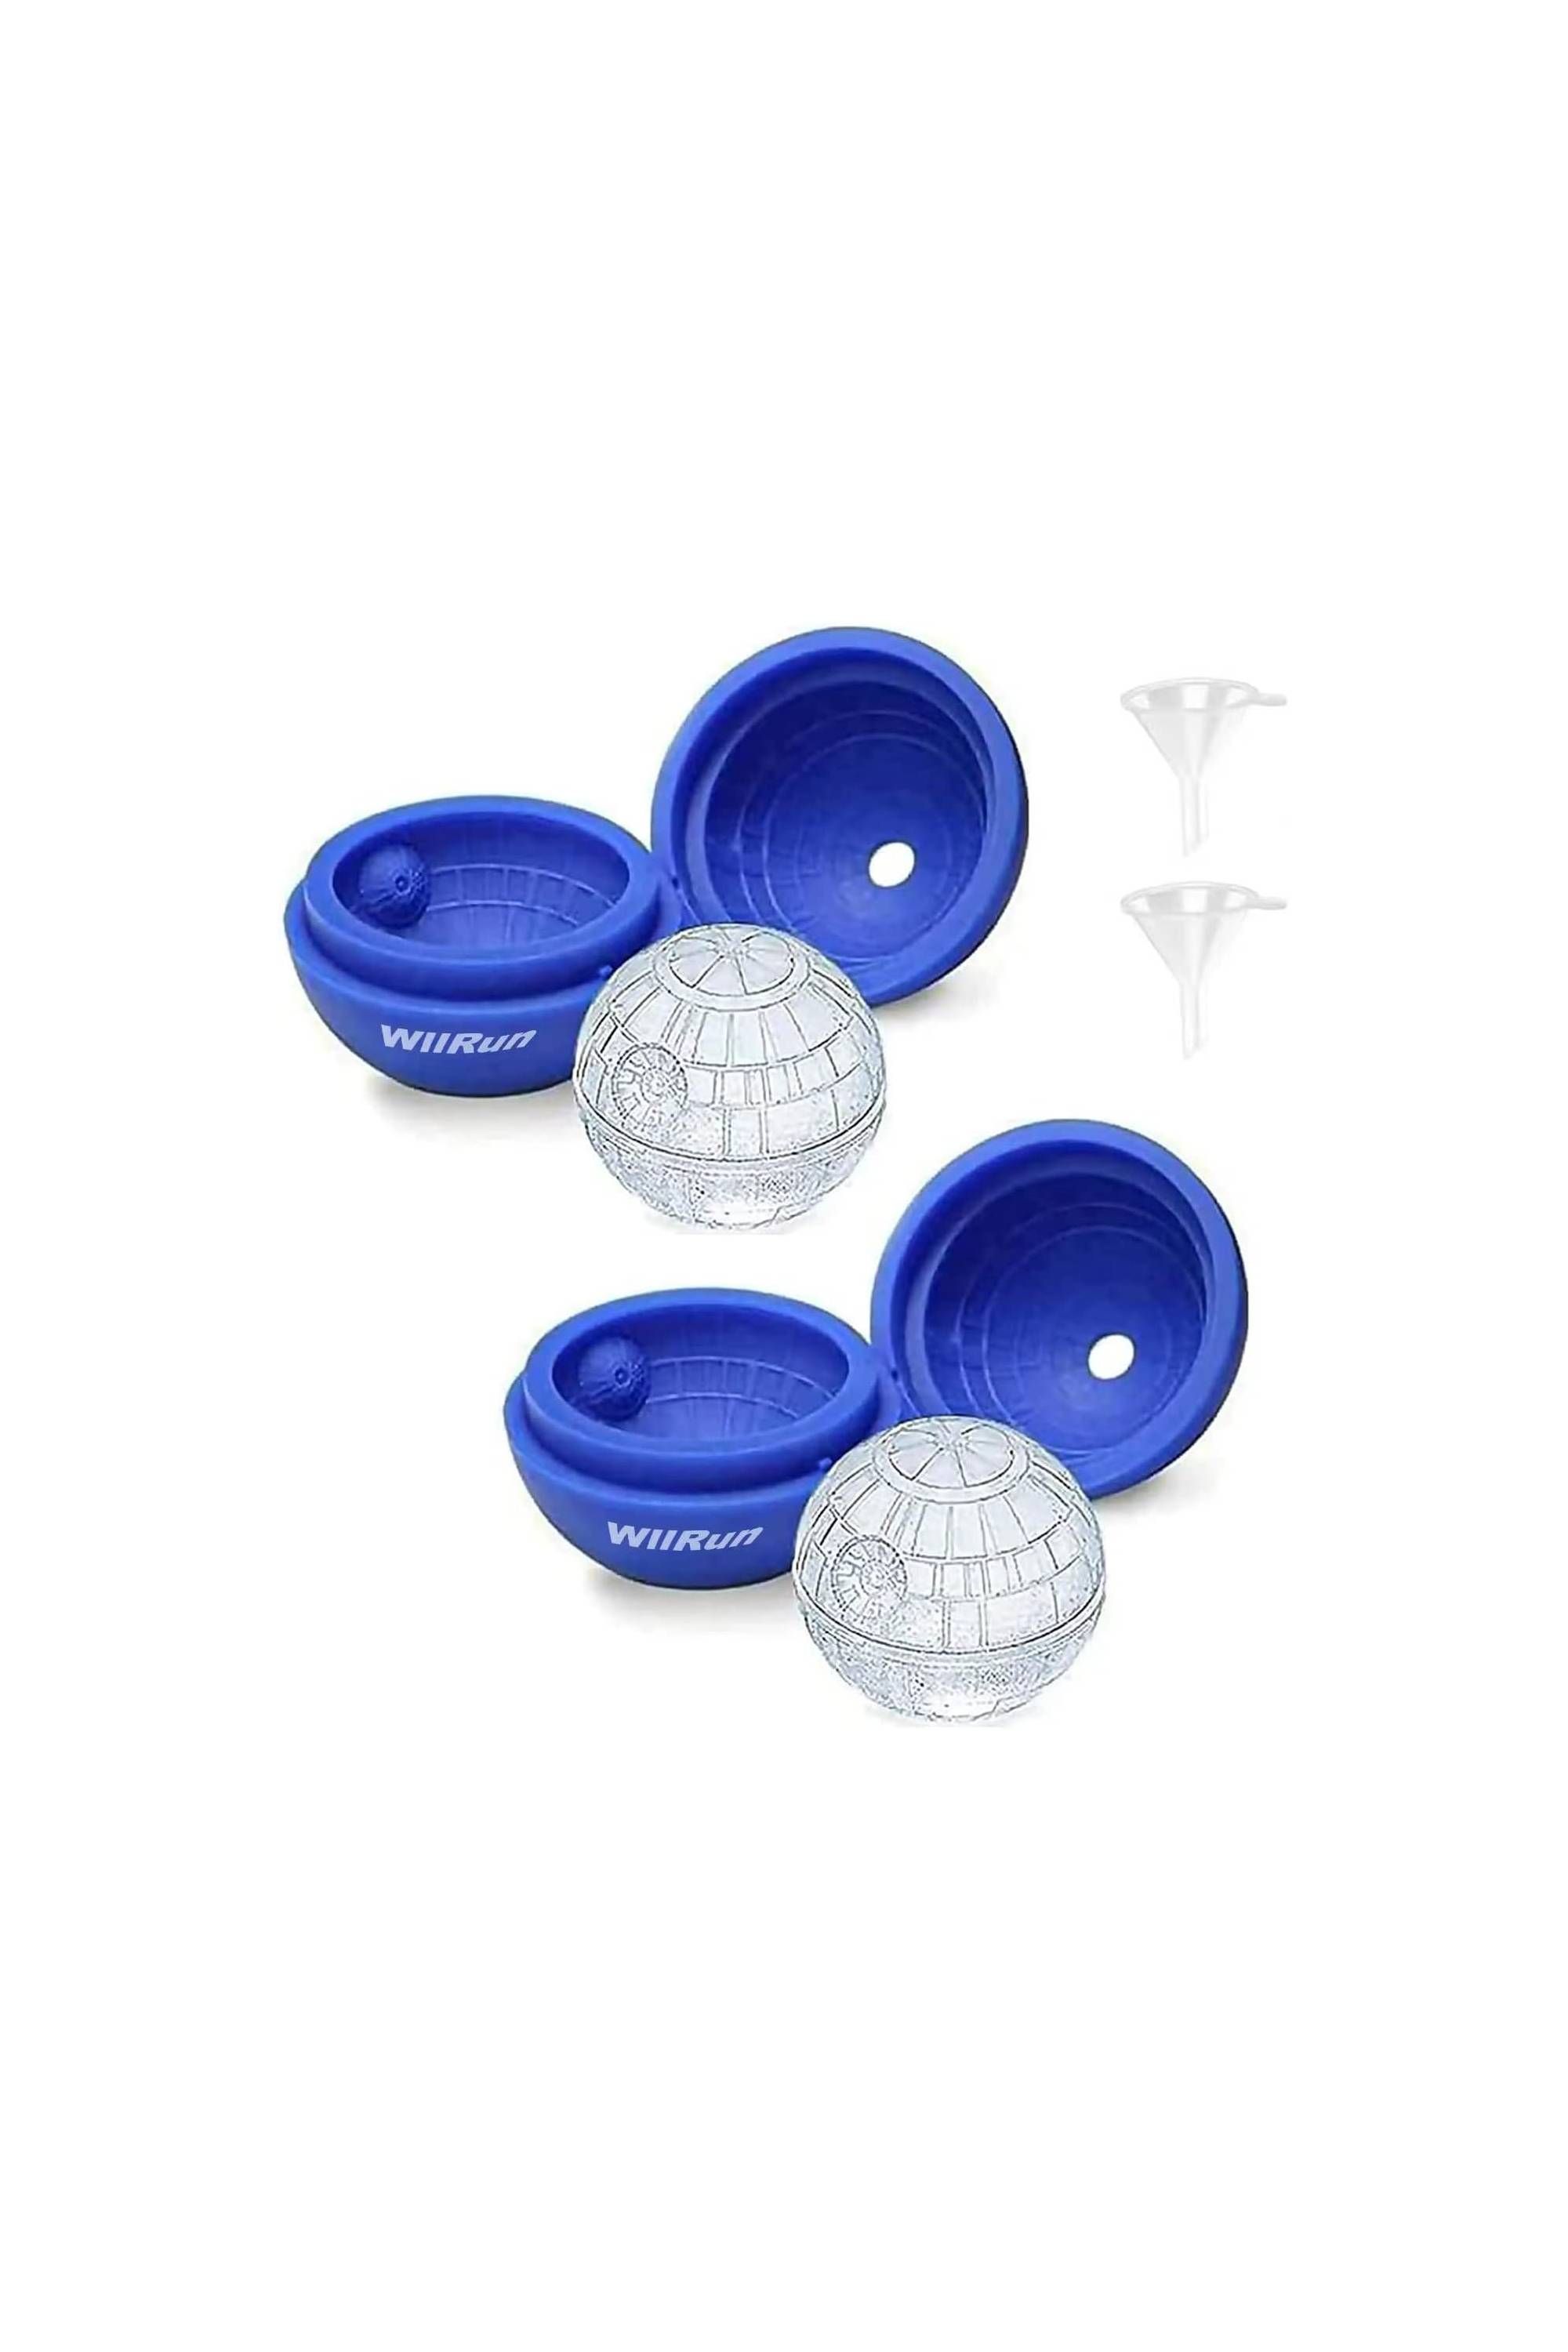 WiiRun Star Wars Death Star Silicone Ice Cube Mold Tray 2-Pack